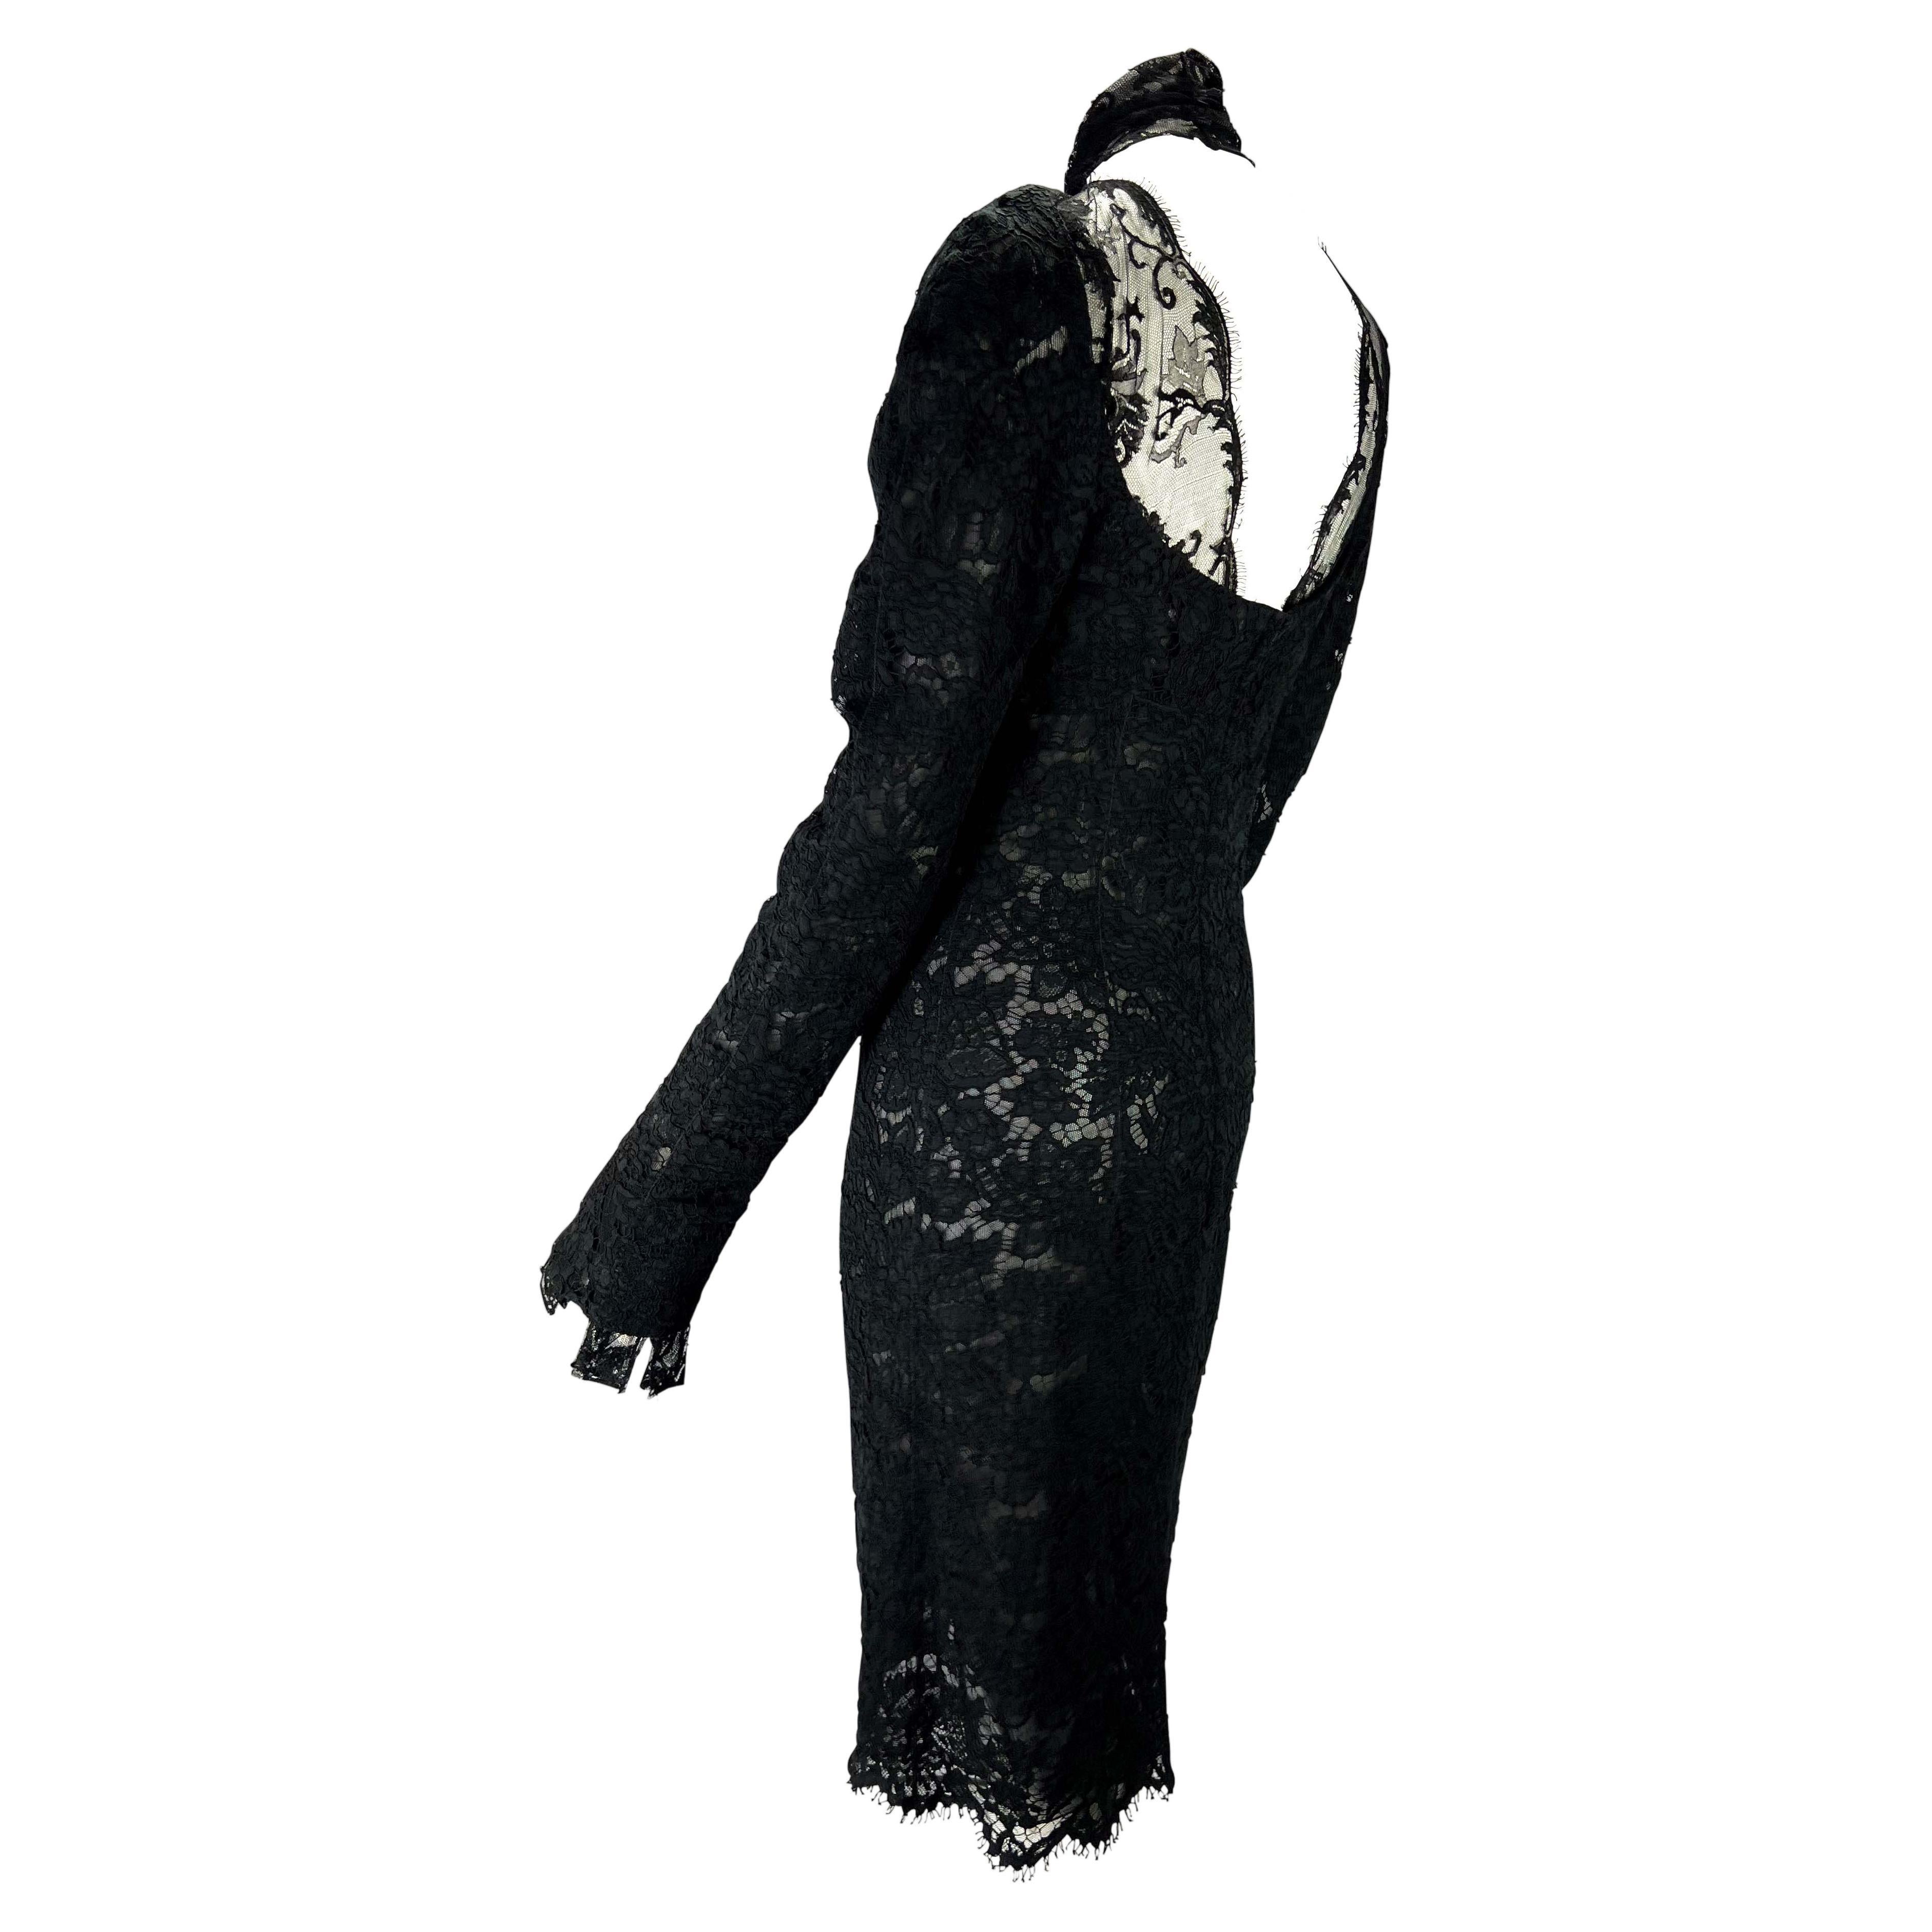 Women's F/W 2002 Yves Saint Laurent by Tom Ford Runway Sheer Black Lace Poet's Dress For Sale